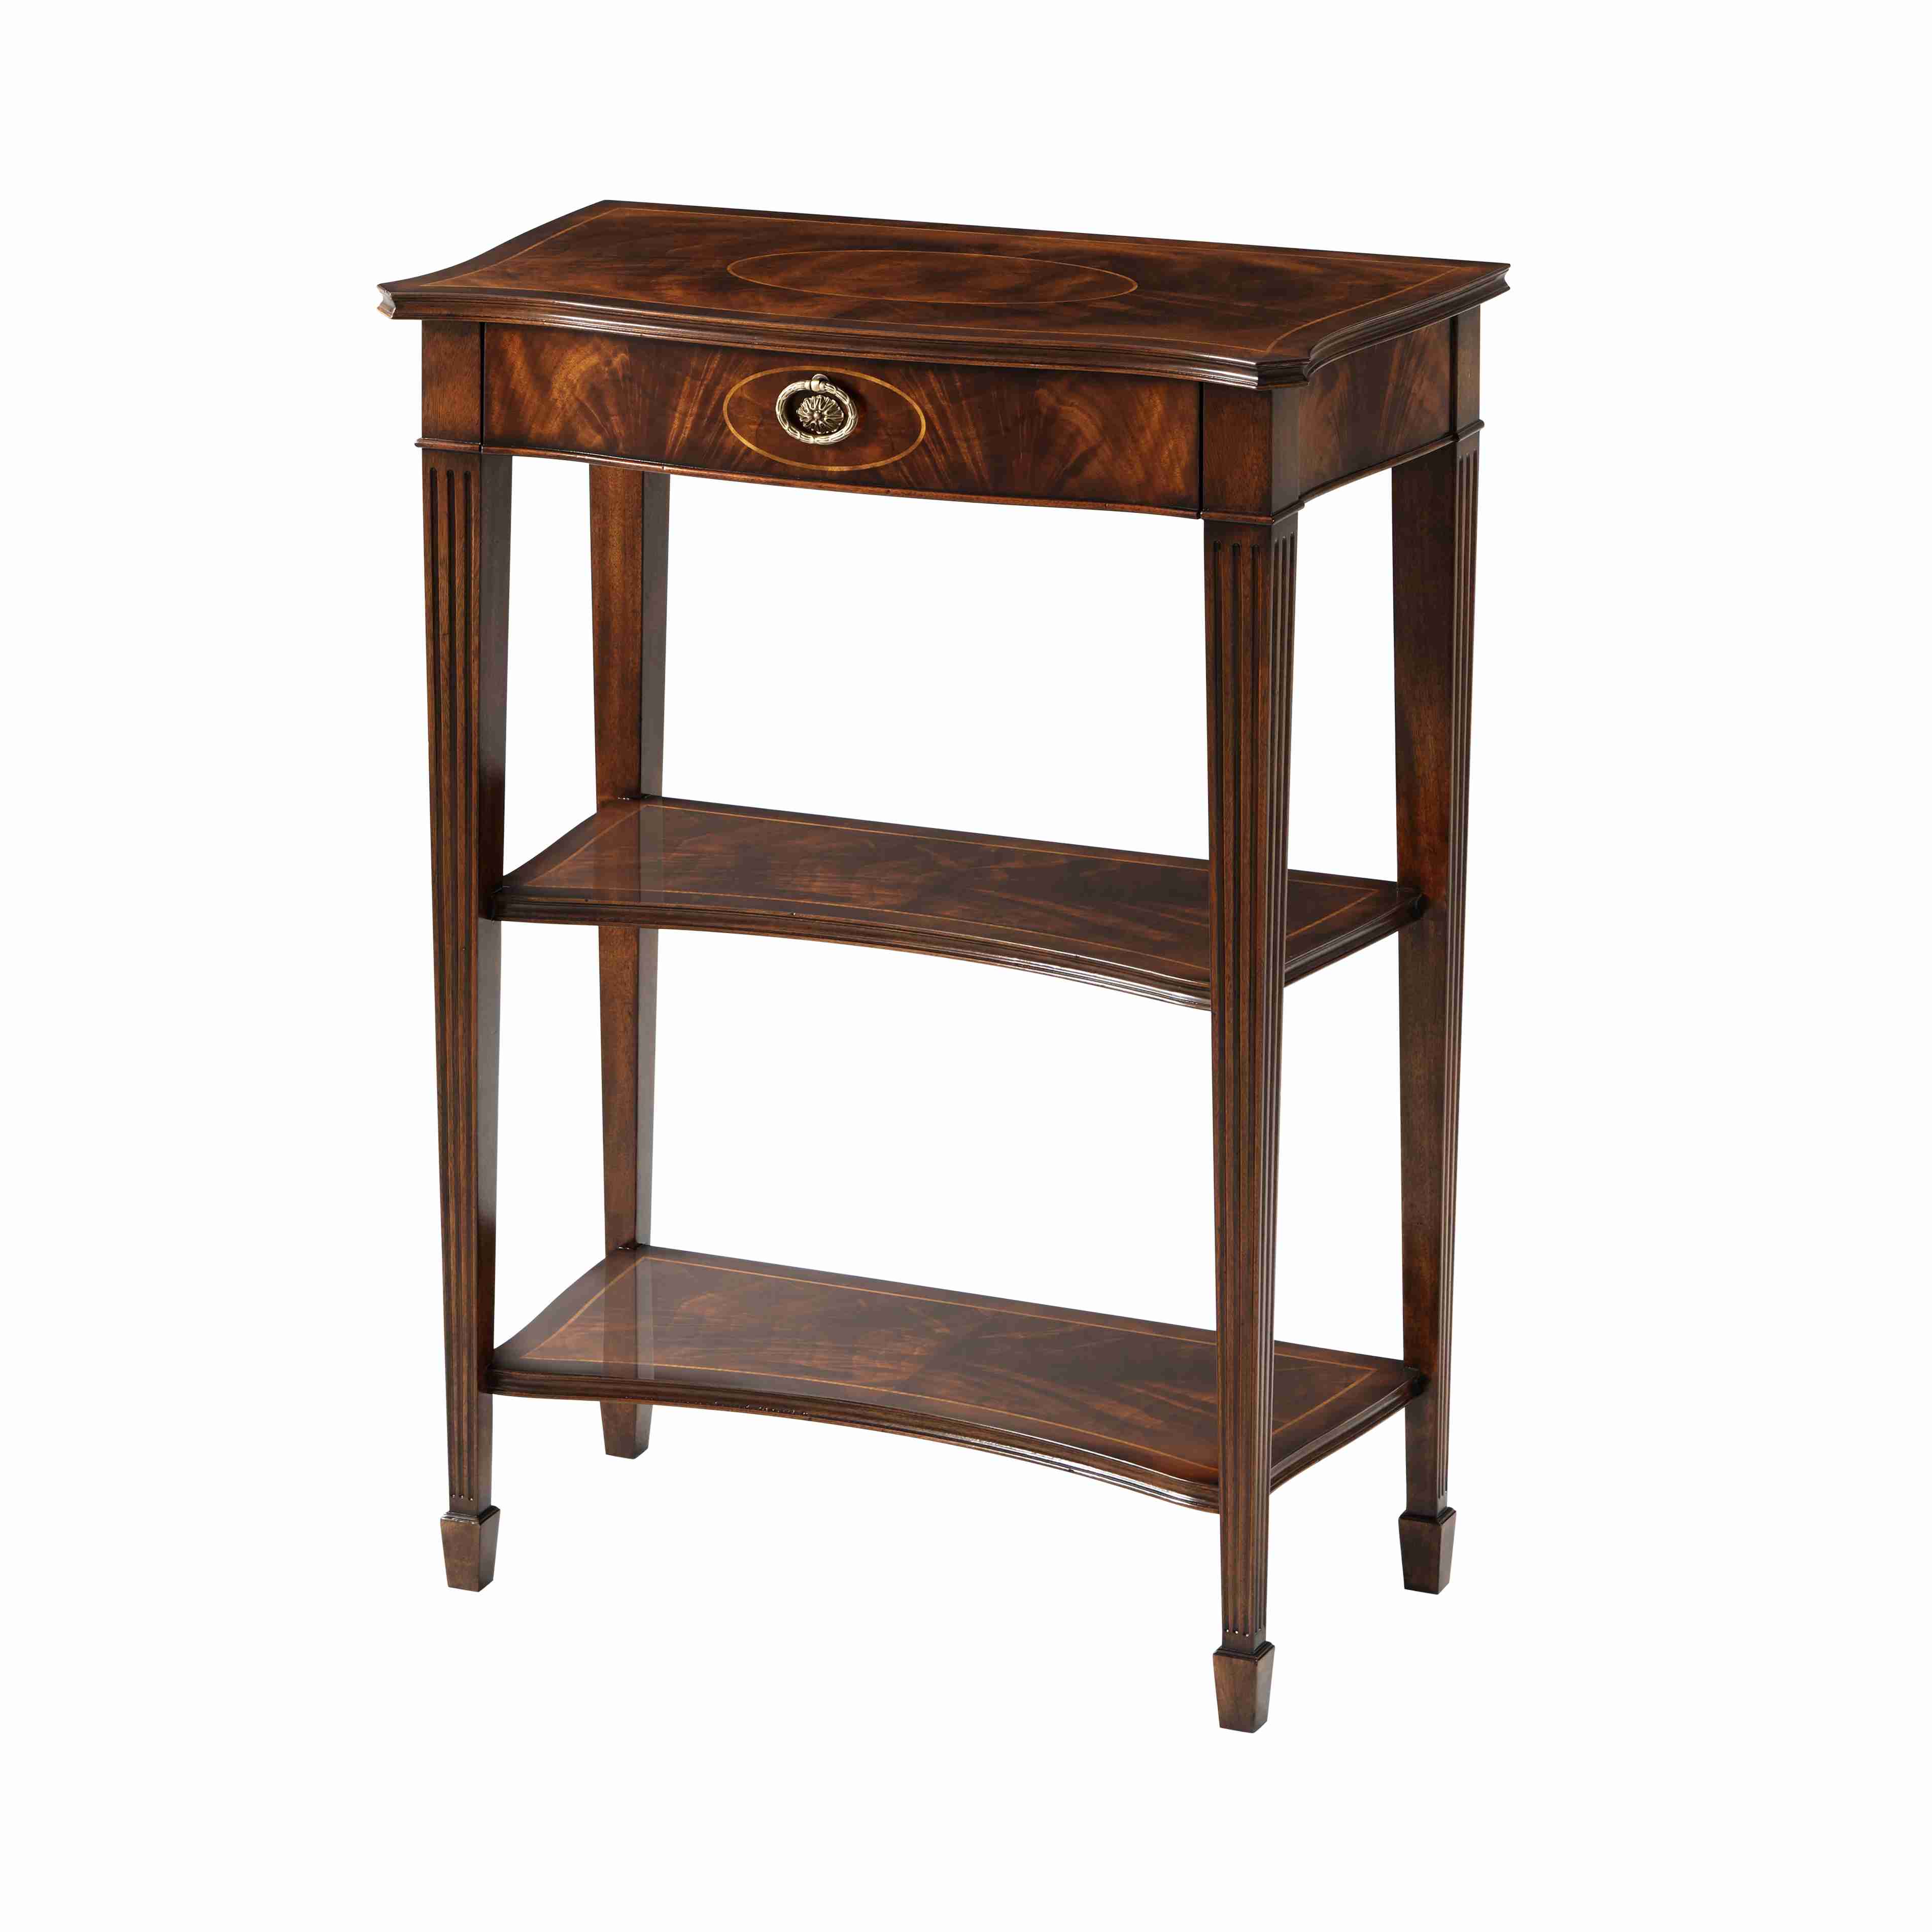 GEORGIAN ACCENT CONSOLE TABLE ESSENTIAL